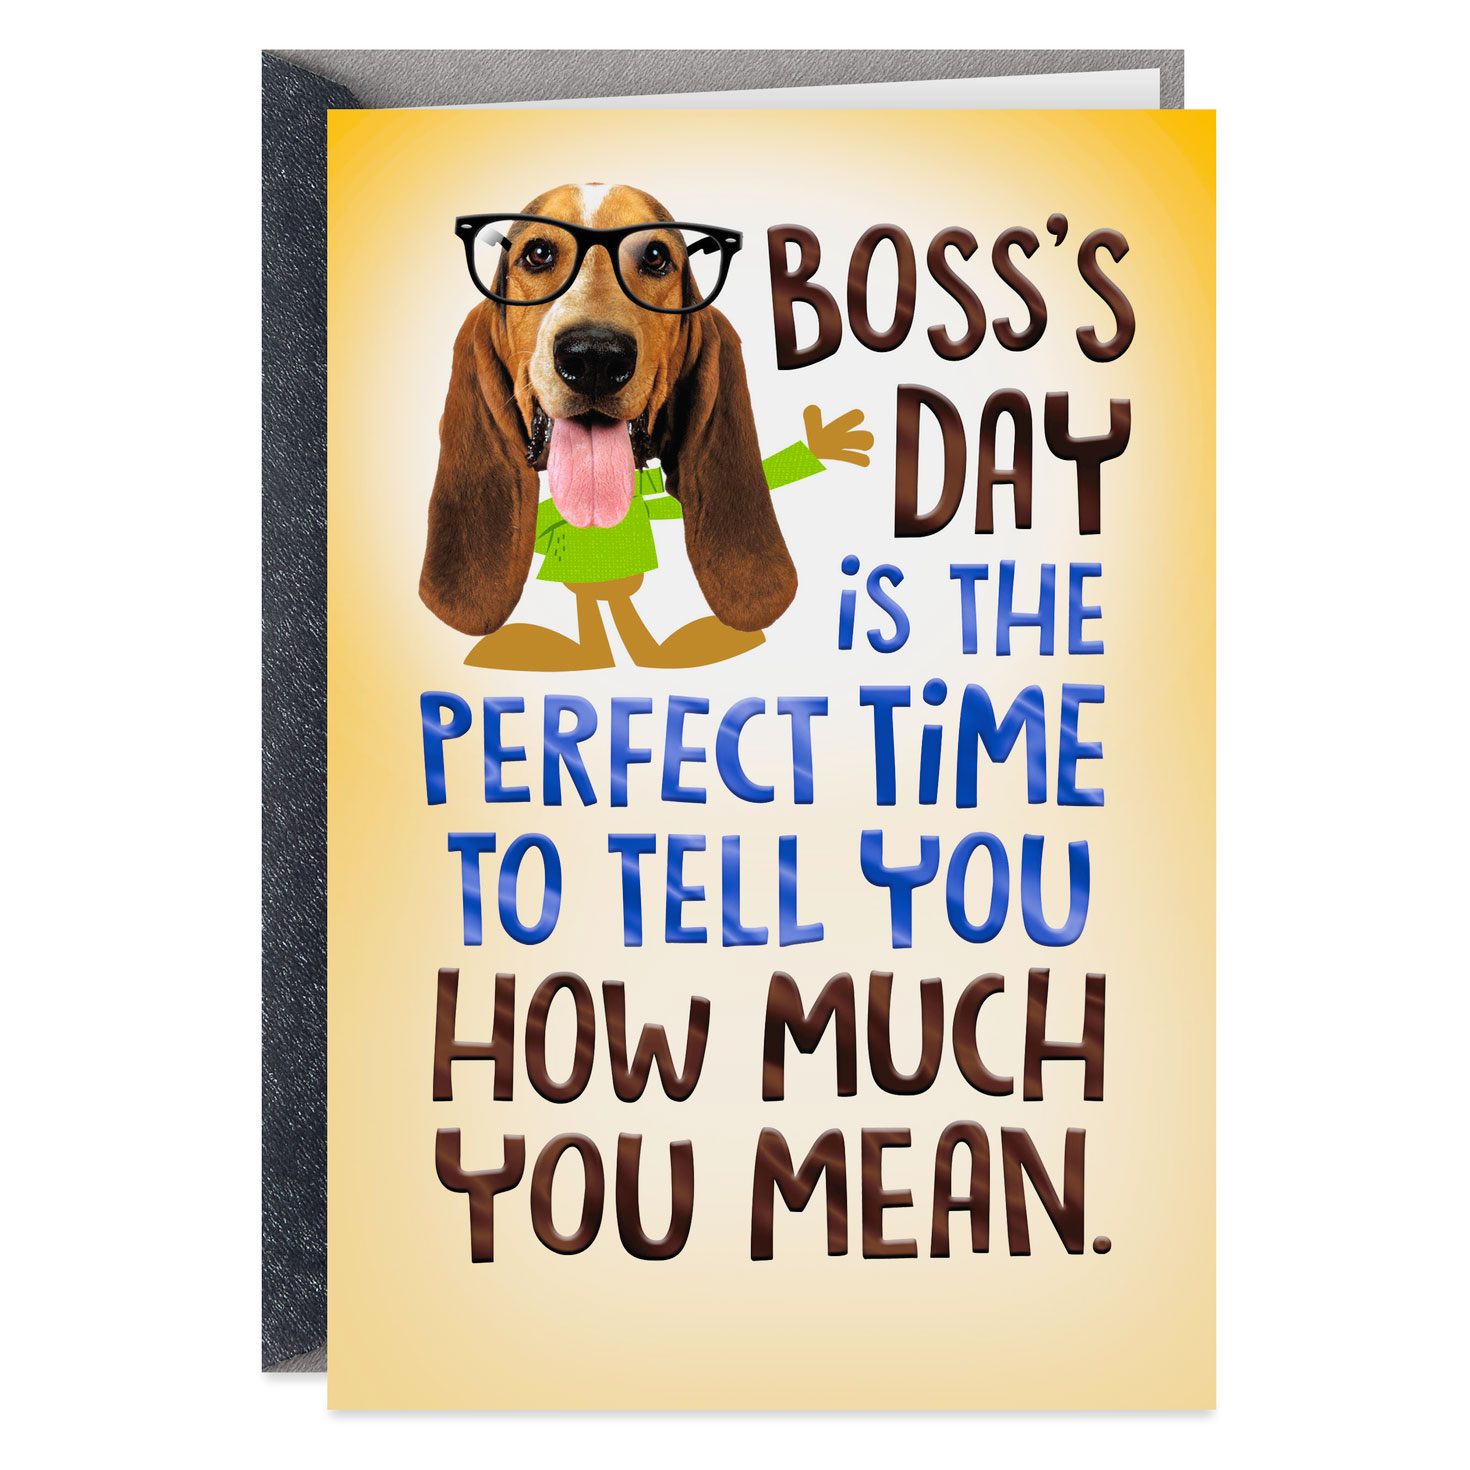 You Not Mean Funny Boss's Day Card - Greeting Cards - Hallmark